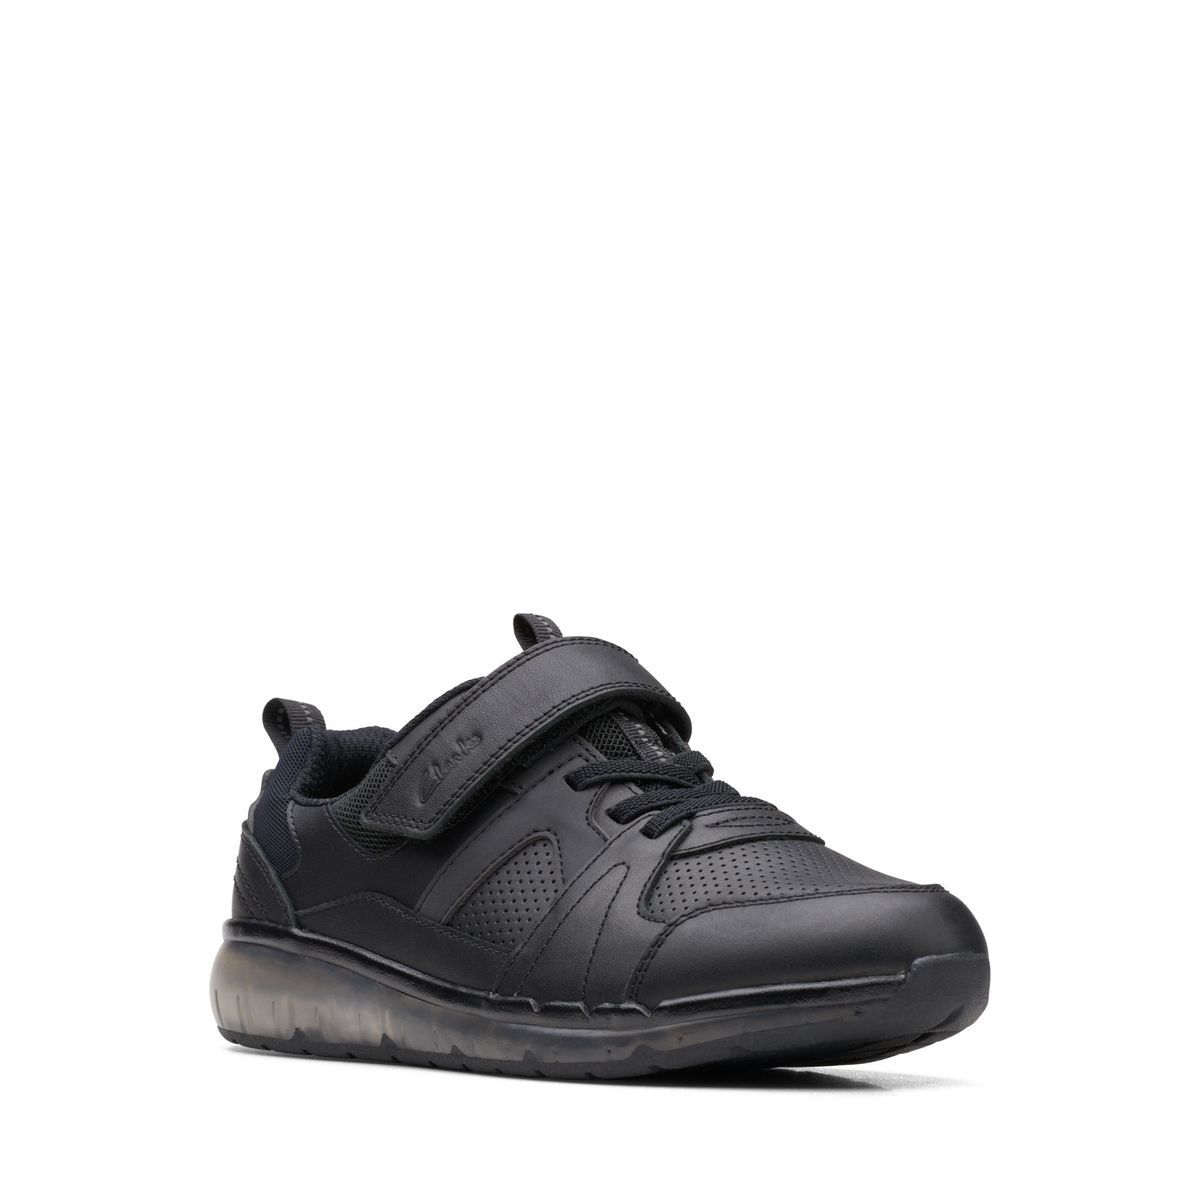 Clarks Spark Beam O Black Leather Kids Boys Trainers 679186F In Size 13 In Plain Black Leather F Width Fitting Regular Fit For kids